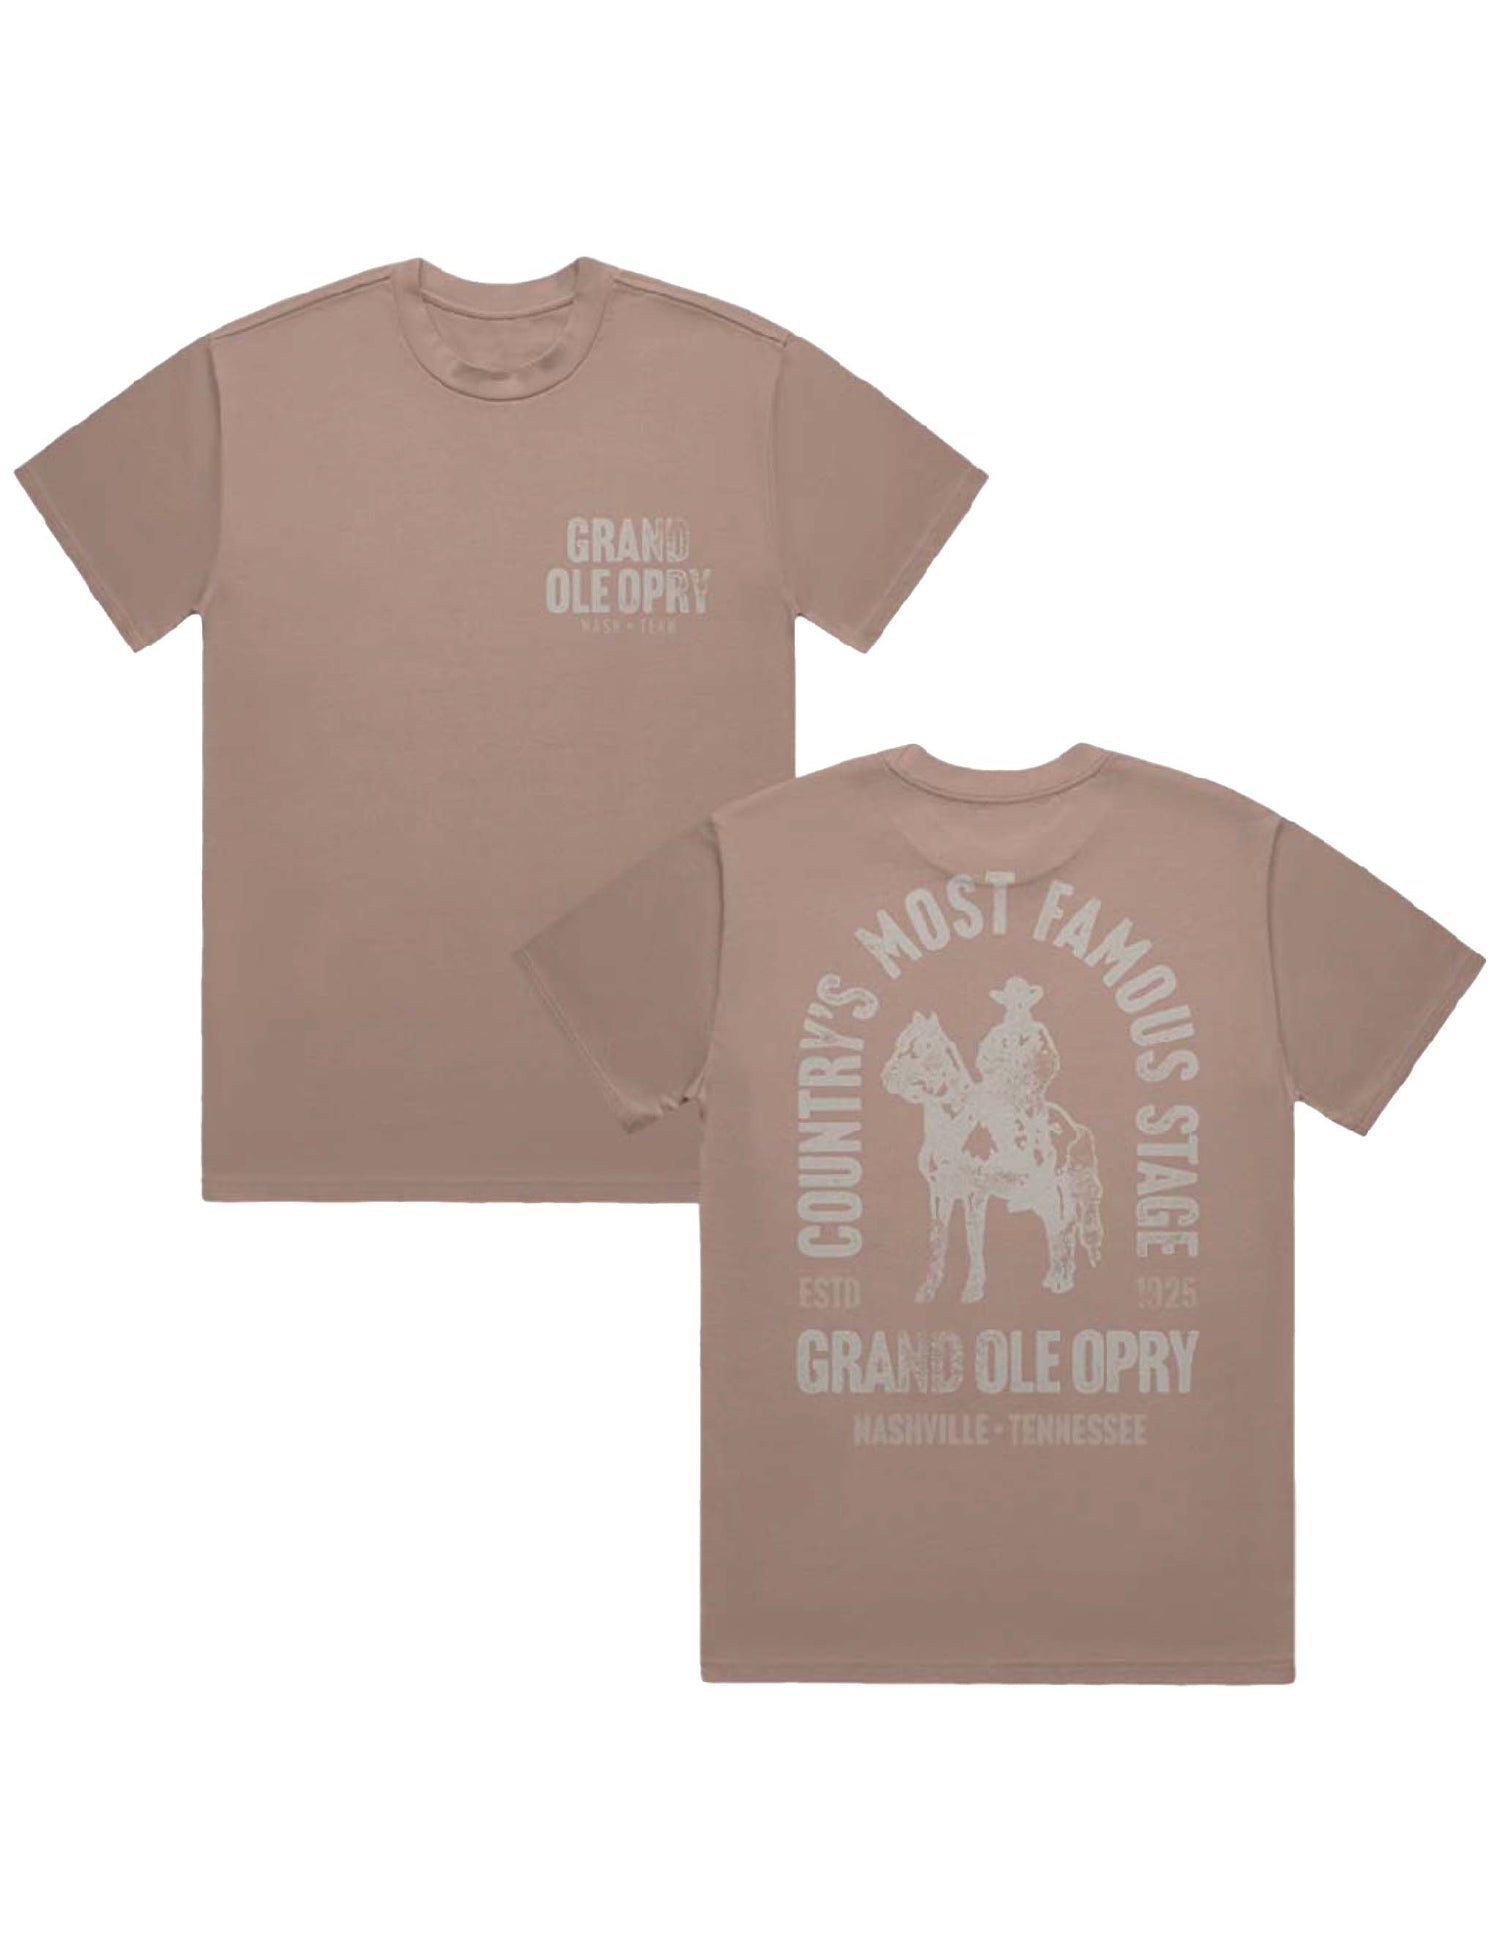 Opry Cowboy Famous Stage T-Shirt